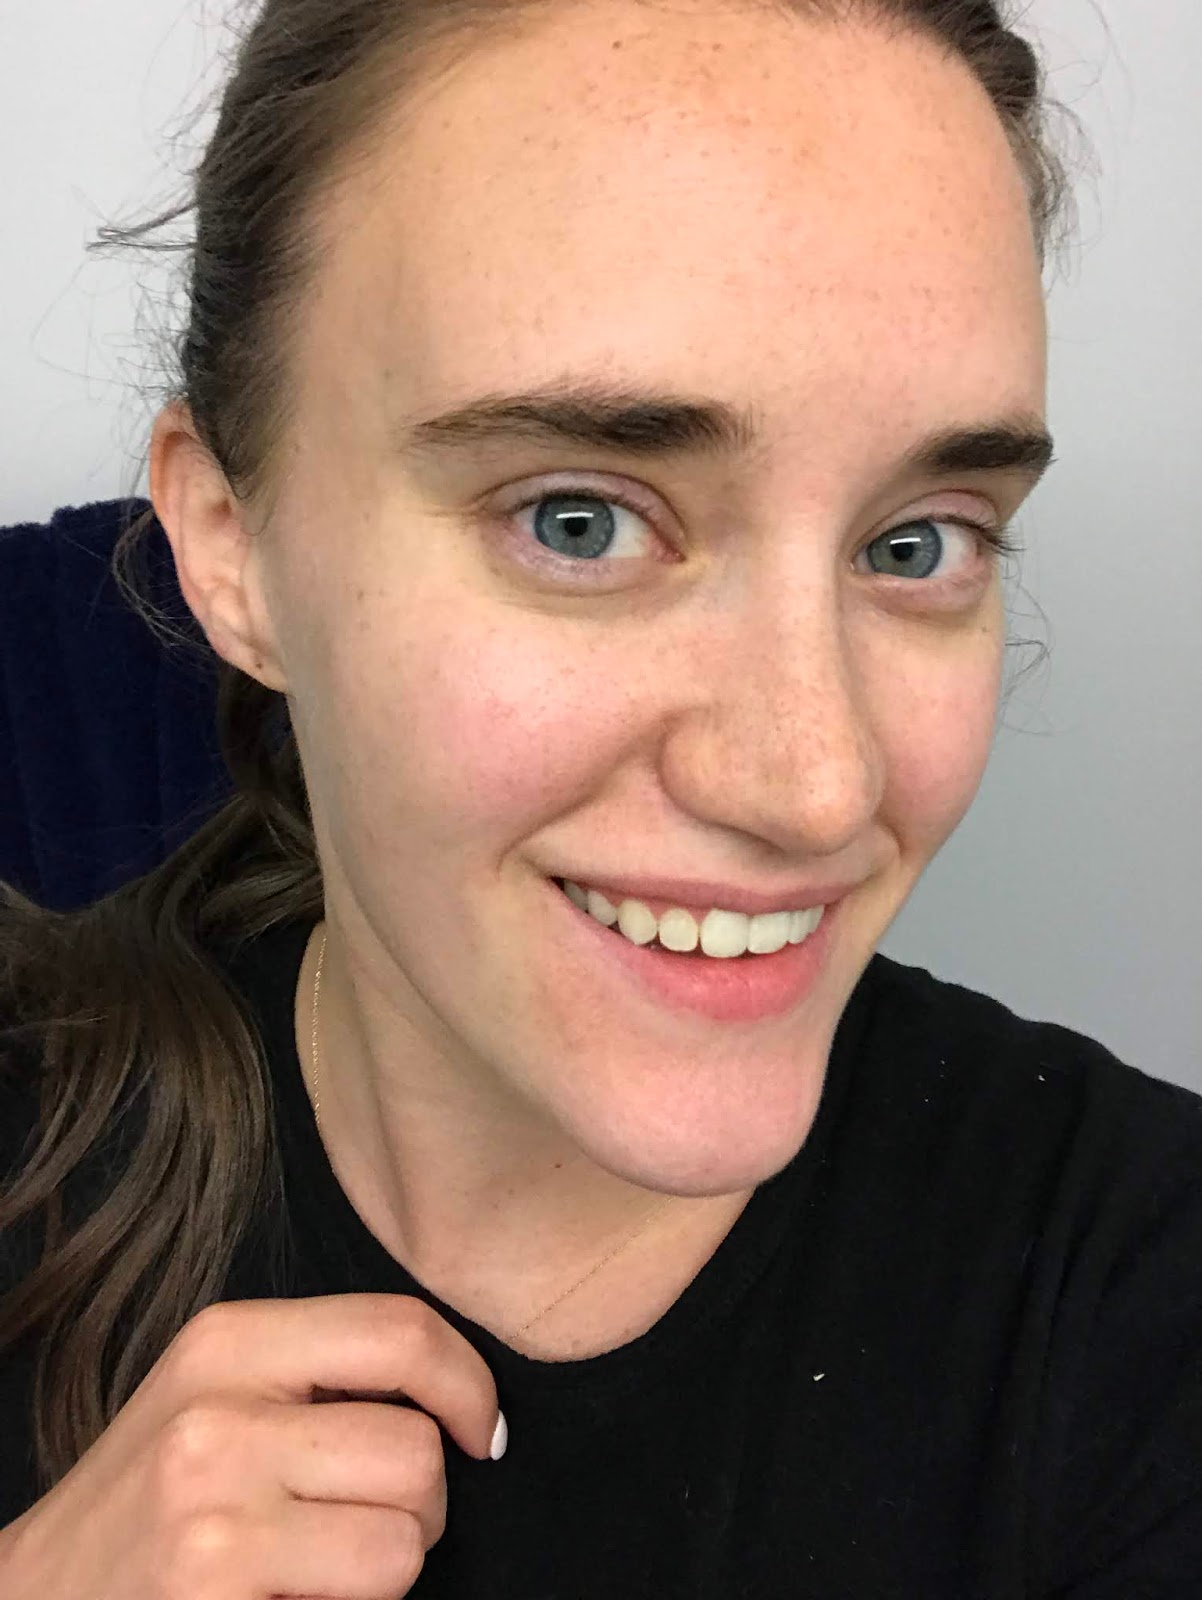 RevitaBrow Review Before And After pictures, featured by popular New York beauty blogger, Covering the Bases